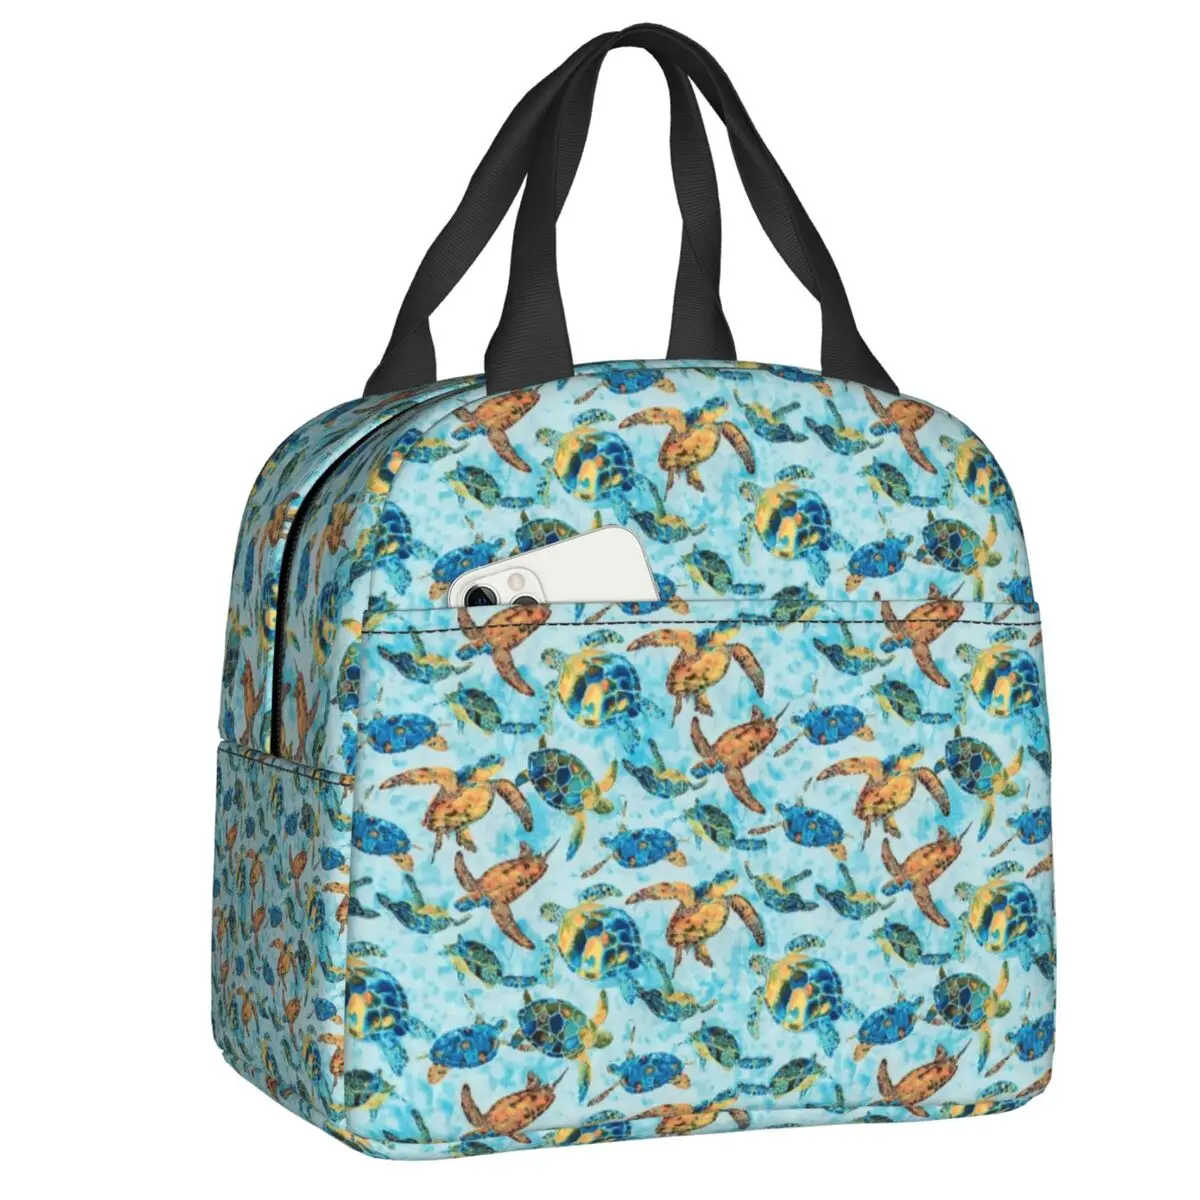 

Watercolor Turtles Pattern Insulated Lunch Tote Bag for Women Ocean Lover Thermal Cooler Food Lunch Box Work School Travel